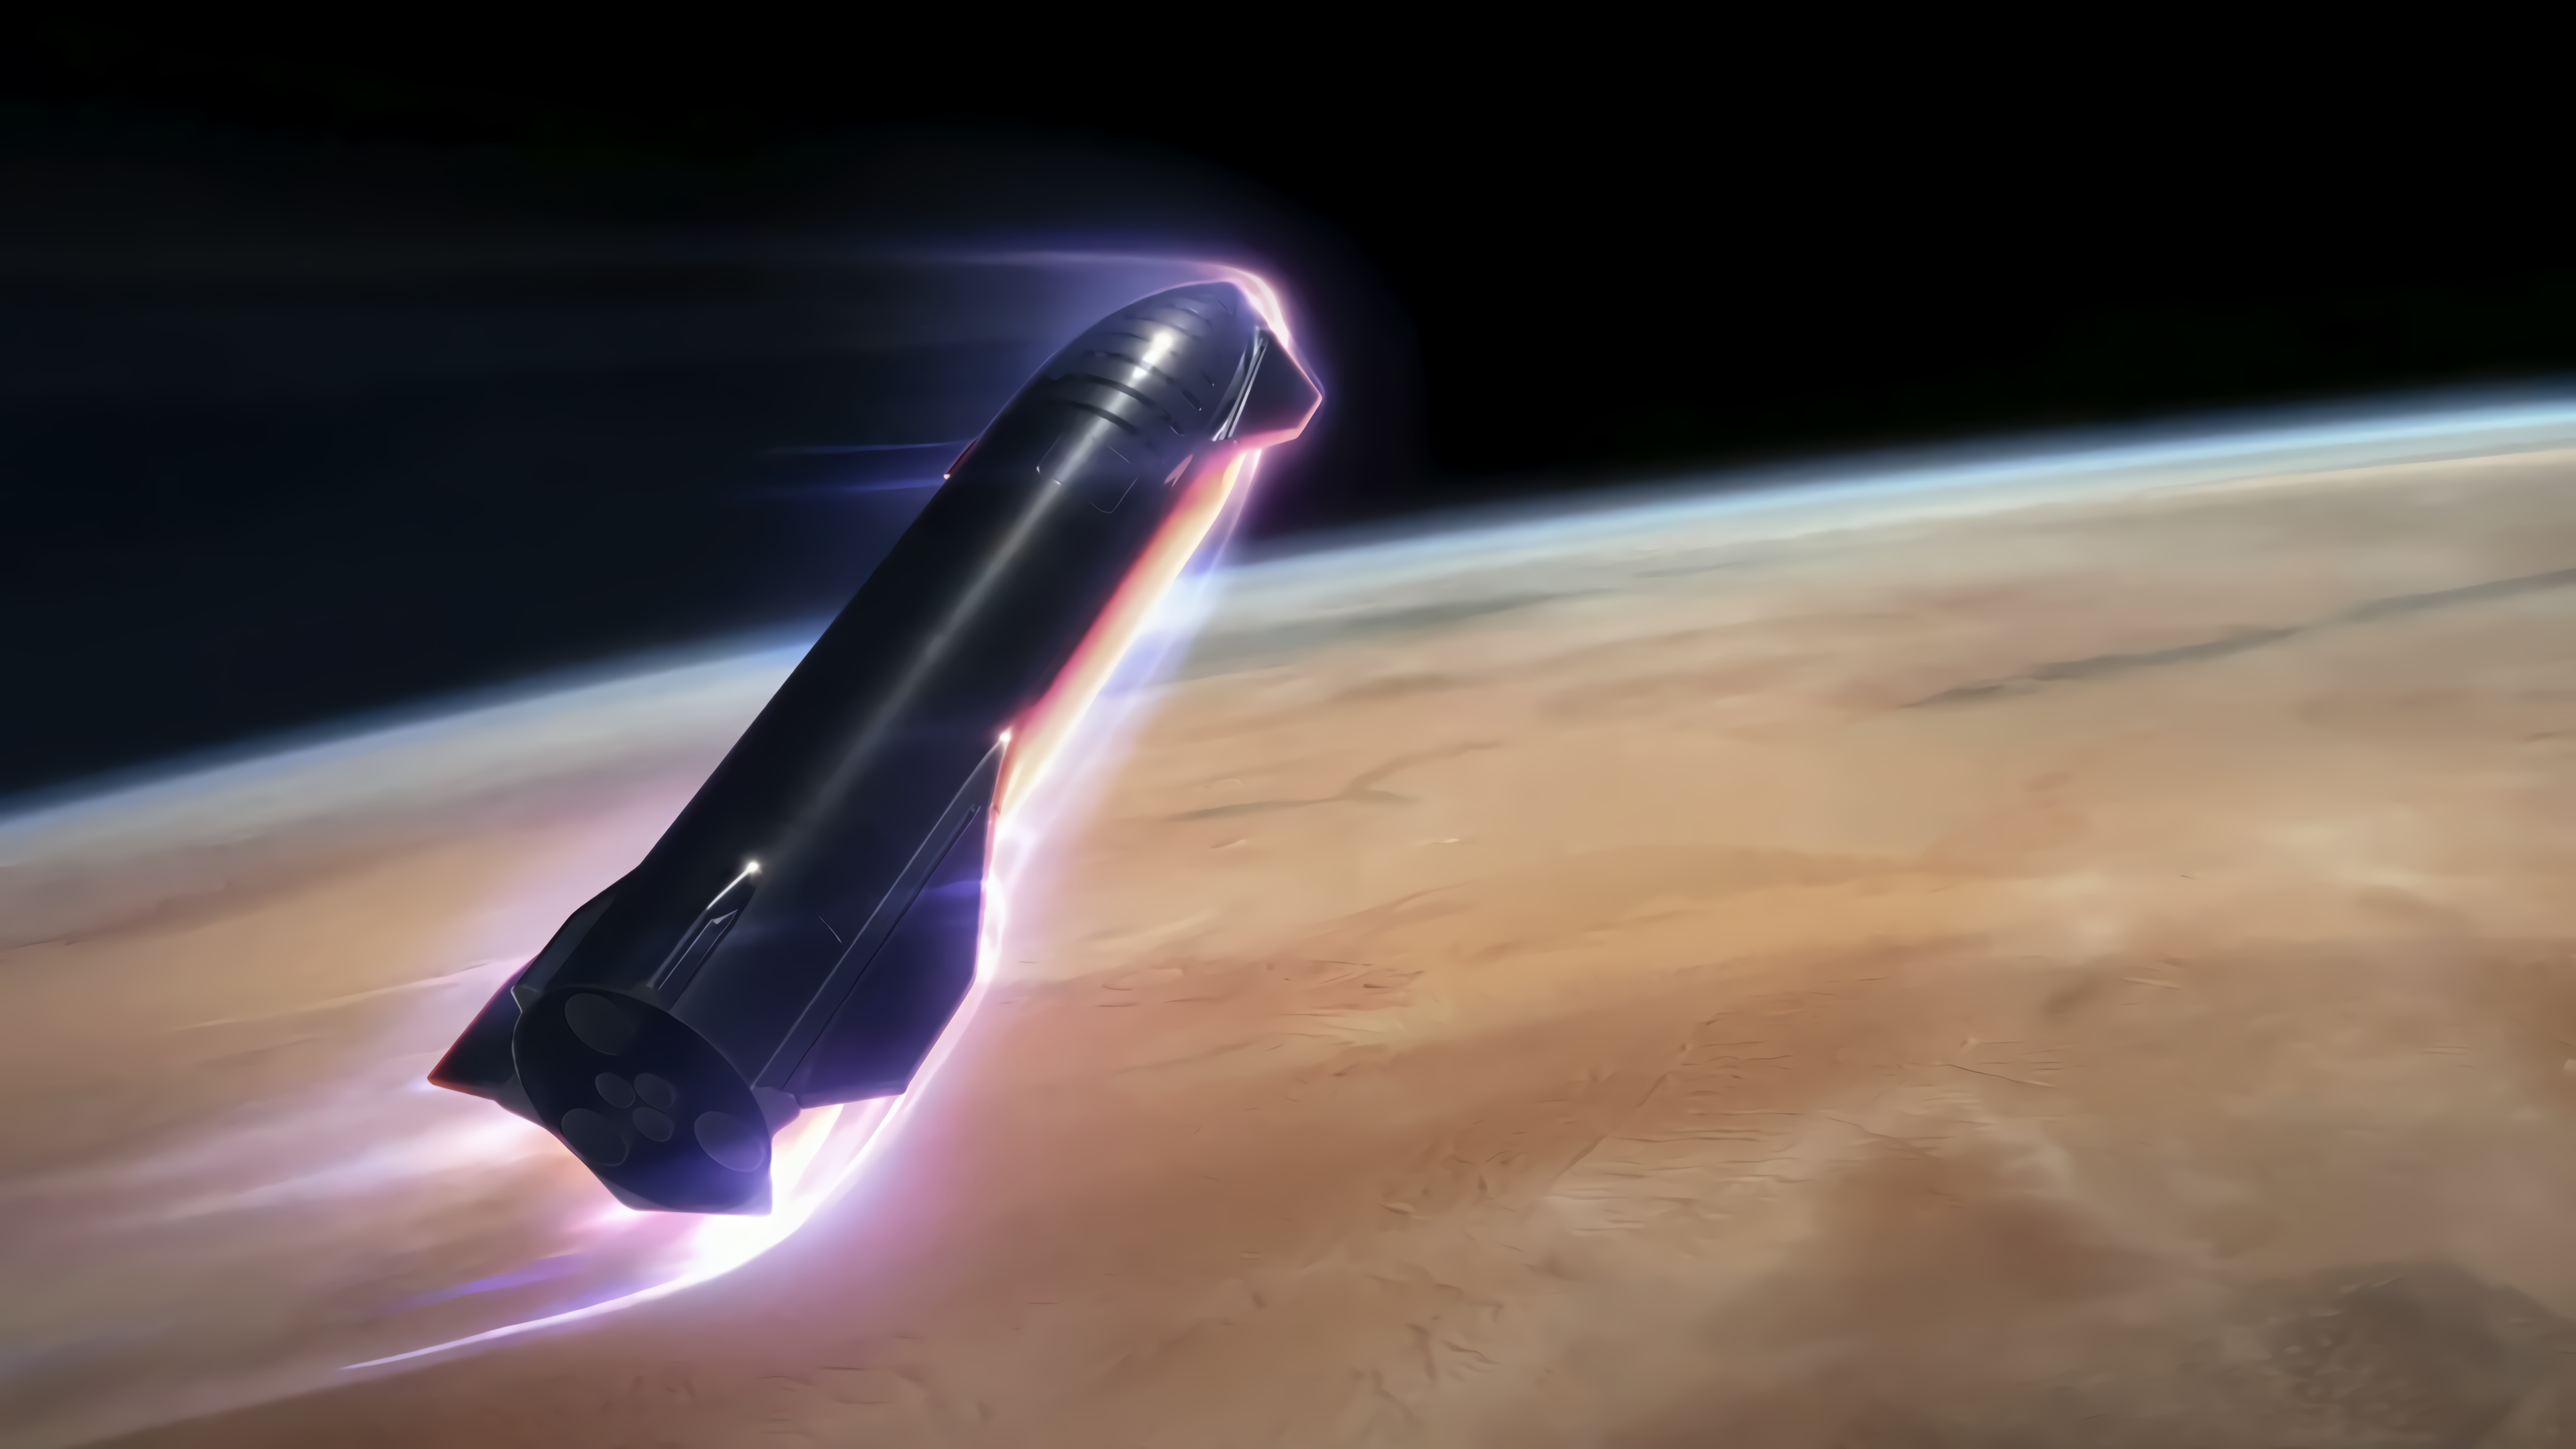 Starship: SpaceX, Rocket, The Future Of Spaceflight, Spacecraft. 3840x2160 4K Wallpaper.